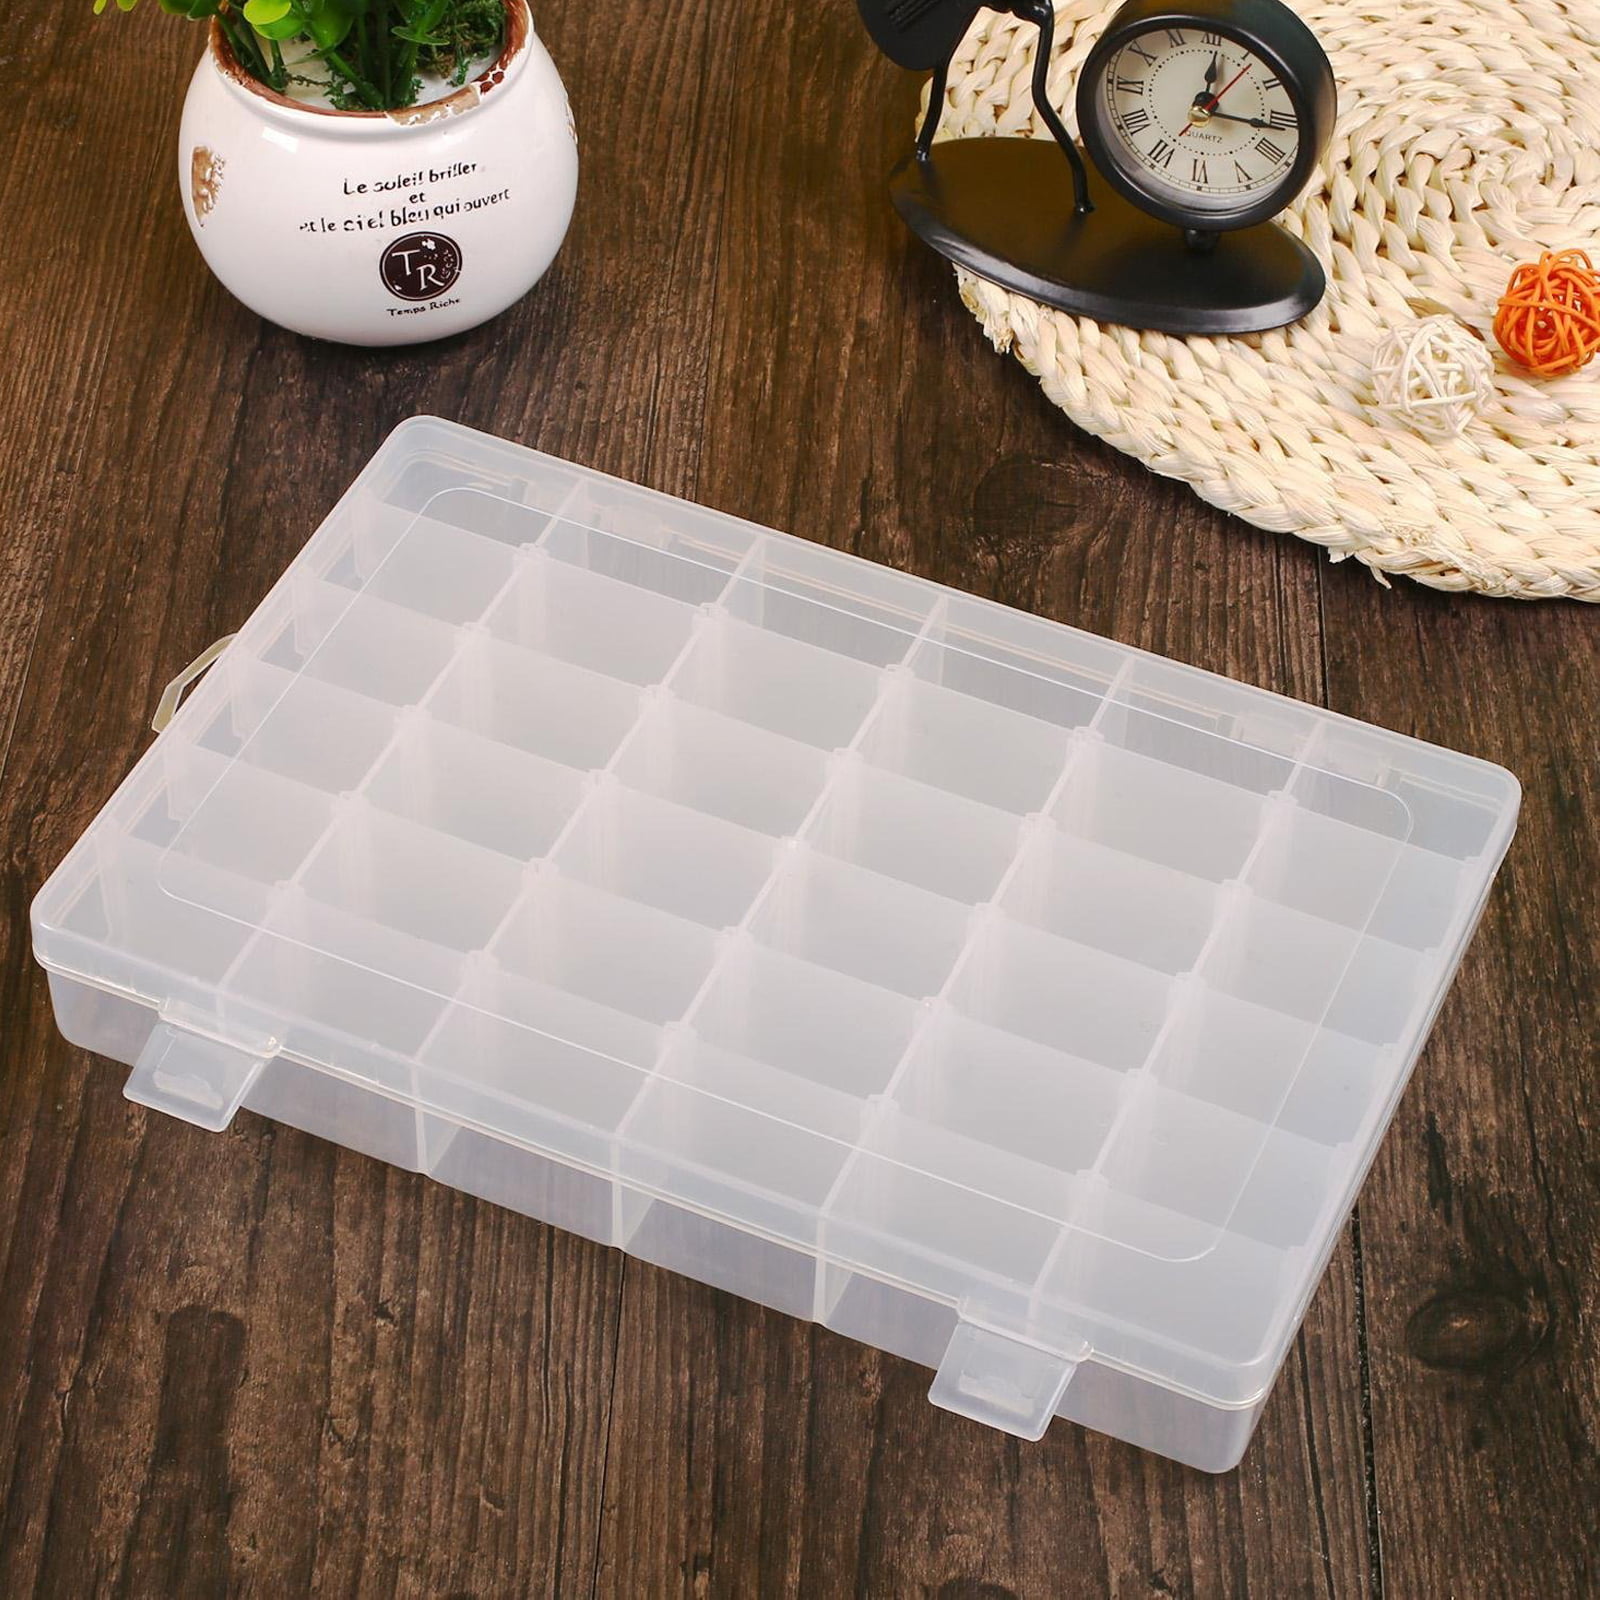  Sooyee 36 Grids Clear Plastic Organizer Box,Craft Organizers  and Storage Container with Adjustable Dividers for Beads,Art DIY, Crafts,  Jewelry, Screw,Fishing Tackle,Washi Tapes : Arts, Crafts & Sewing